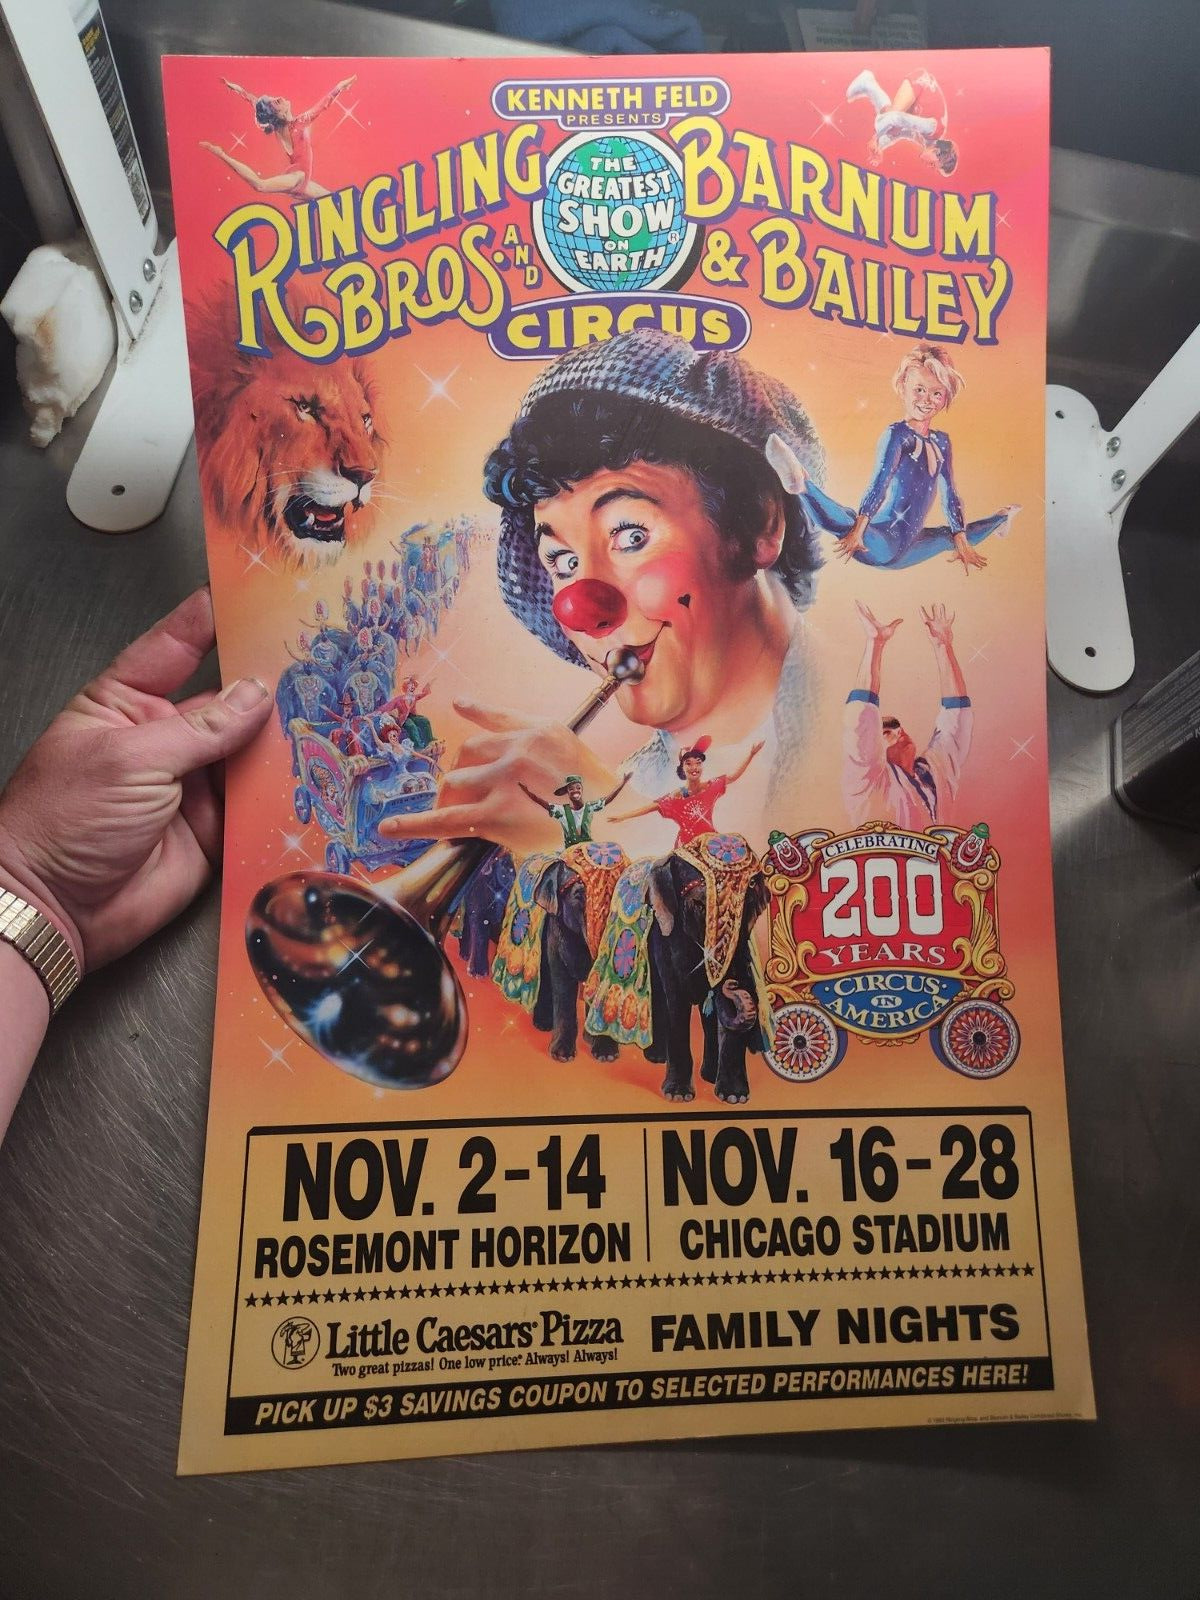 Vintage 1980s 1990s Little Caesars Ringling Bros And Barnum Bailey Circus Poster